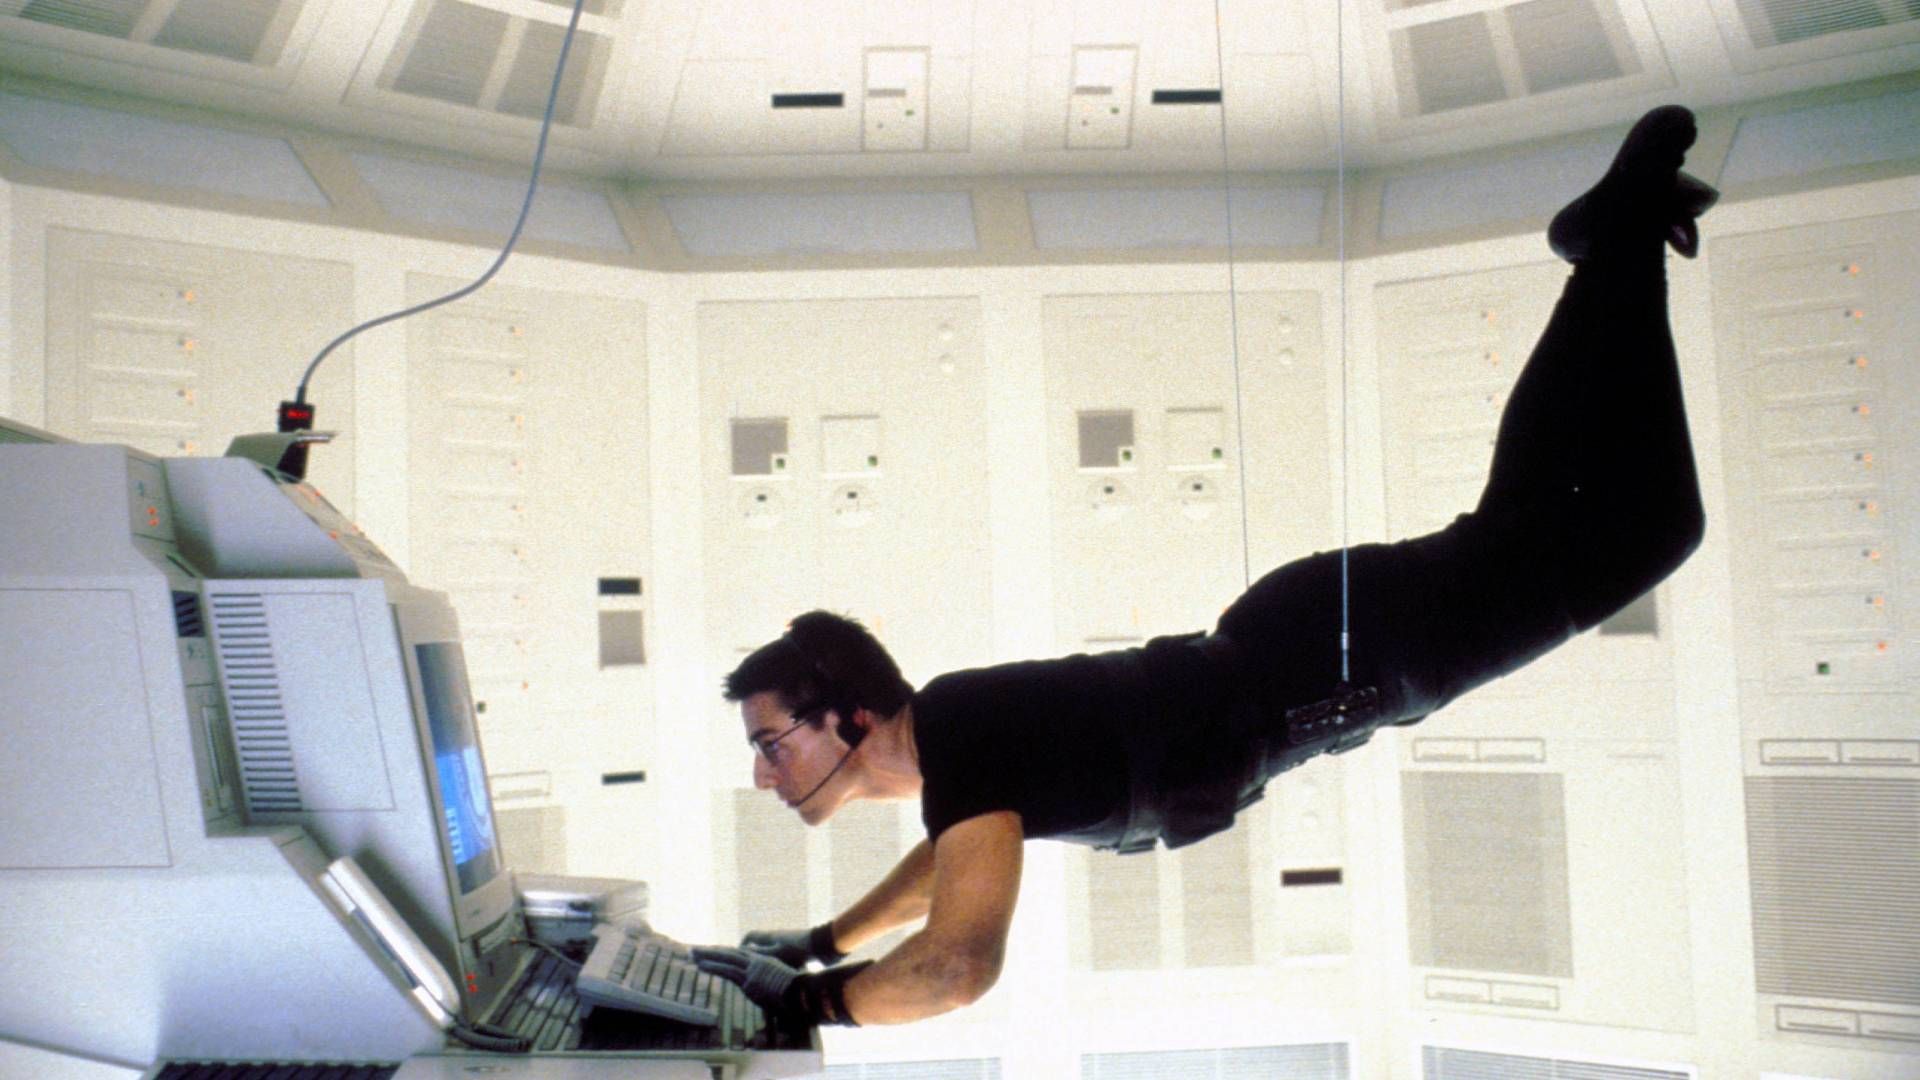 <p>                     It’s an iconic image that any action fan will know well: Tom Cruise hanging from wires to complete the Langley heist in Mission: Impossible. The nearly 20-minute-long scene sees Cruise’s IMF agent Ethan Hunt infiltrating a secure terminal in the CIA headquarters in Langley, Virginia. Navigating a pressure-sensitive floor, a temperature-controlled environment, and an alarm that will go off if a sound louder than a whisper echoes, the tension ratchets as Hunt tries to break into the computer. While it’s not as loud and death-defying as most of the stunts in Cruise’s films, it’s no less iconic, and it cemented Mission: Impossible as the actor’s first franchise.                   </p>